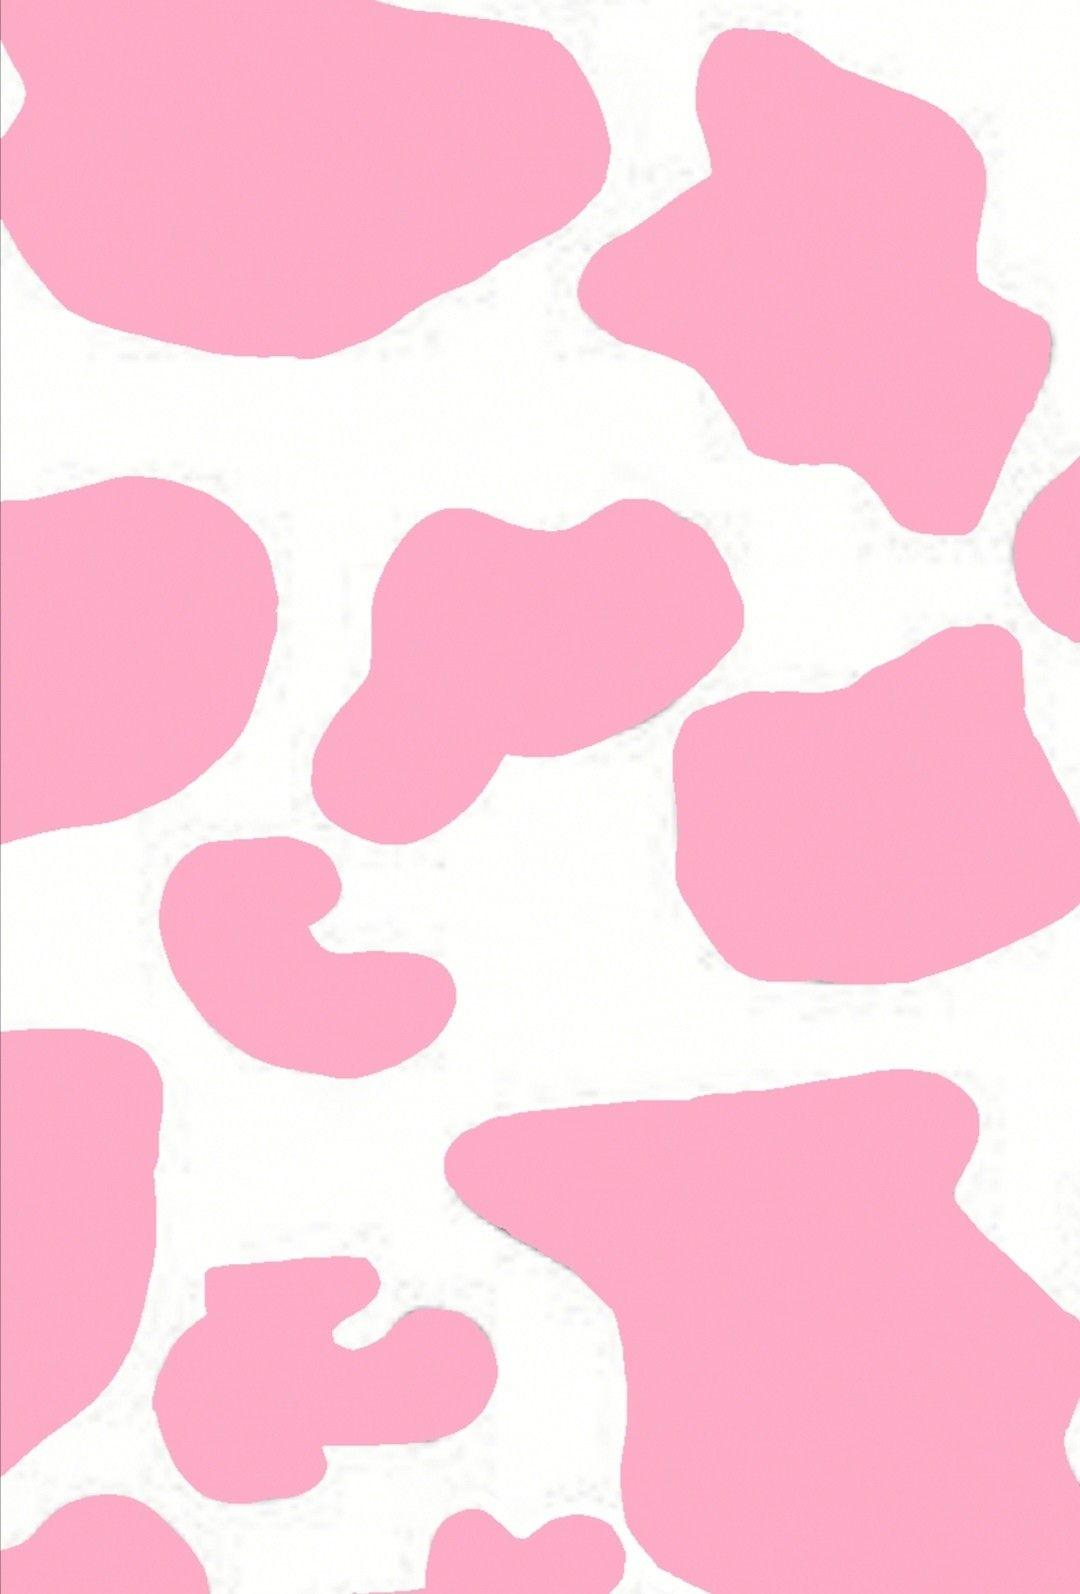 Pink Cow Print Wallpapers - Top Free Pink Cow Print Backgrounds ...